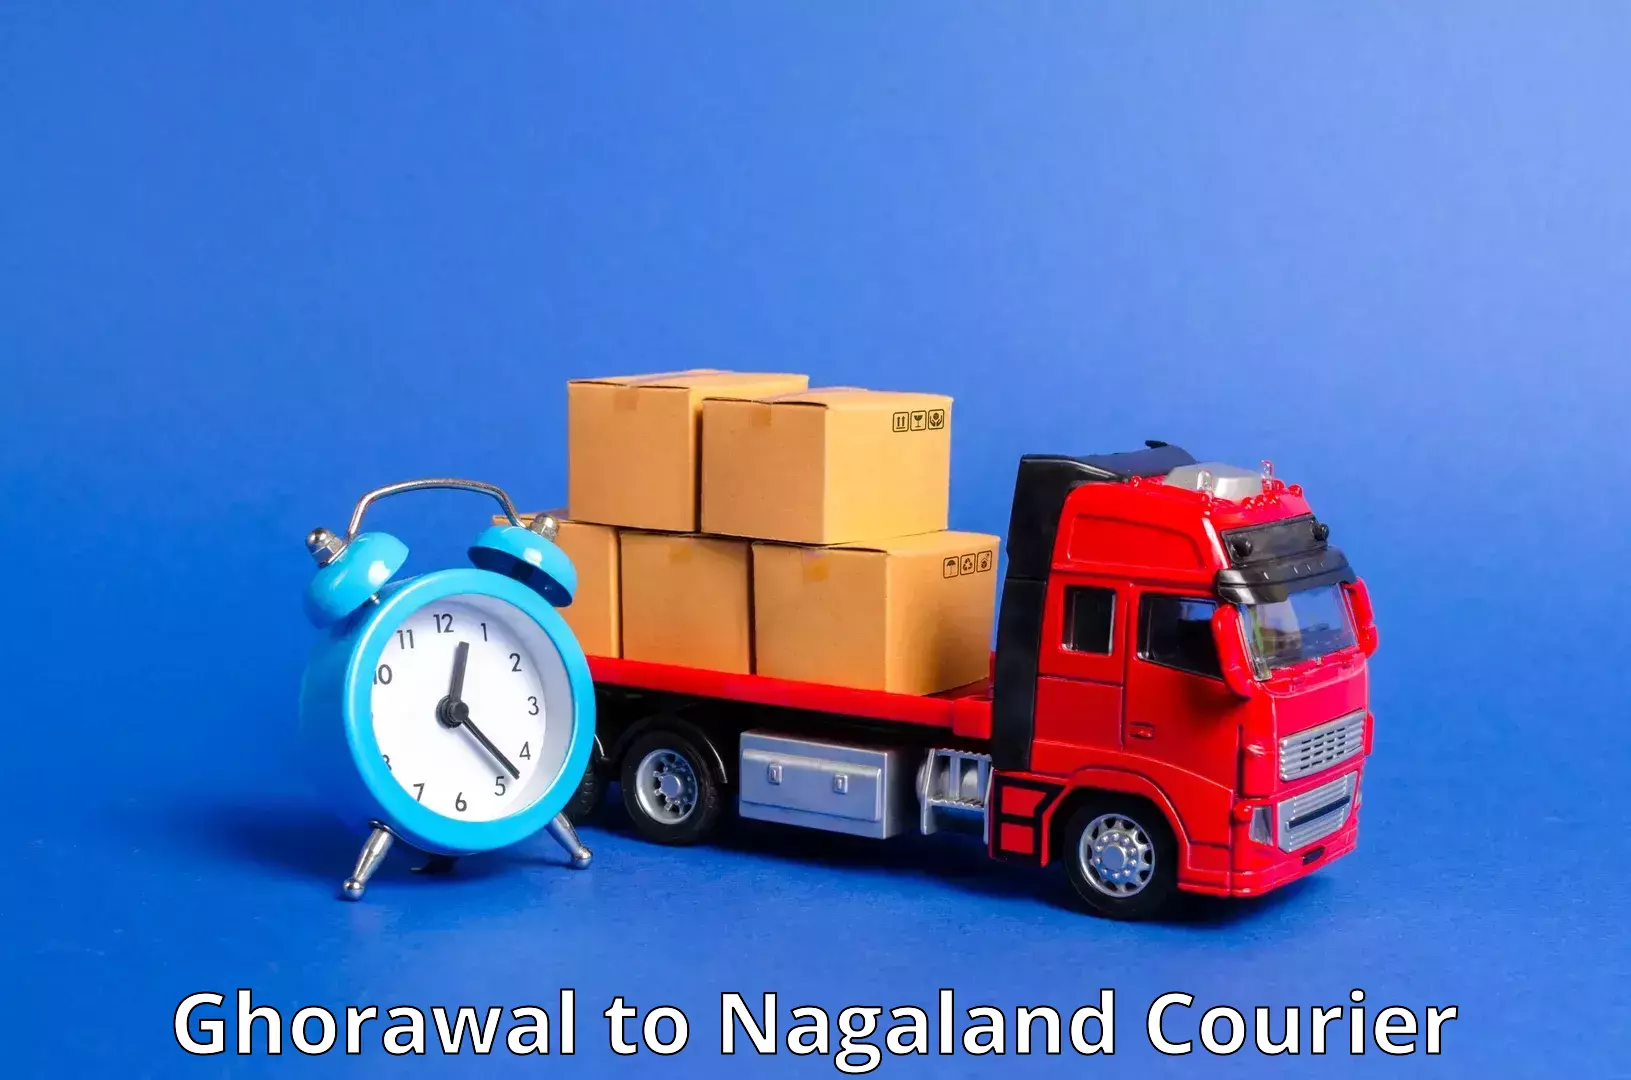 Speedy delivery service Ghorawal to Dimapur